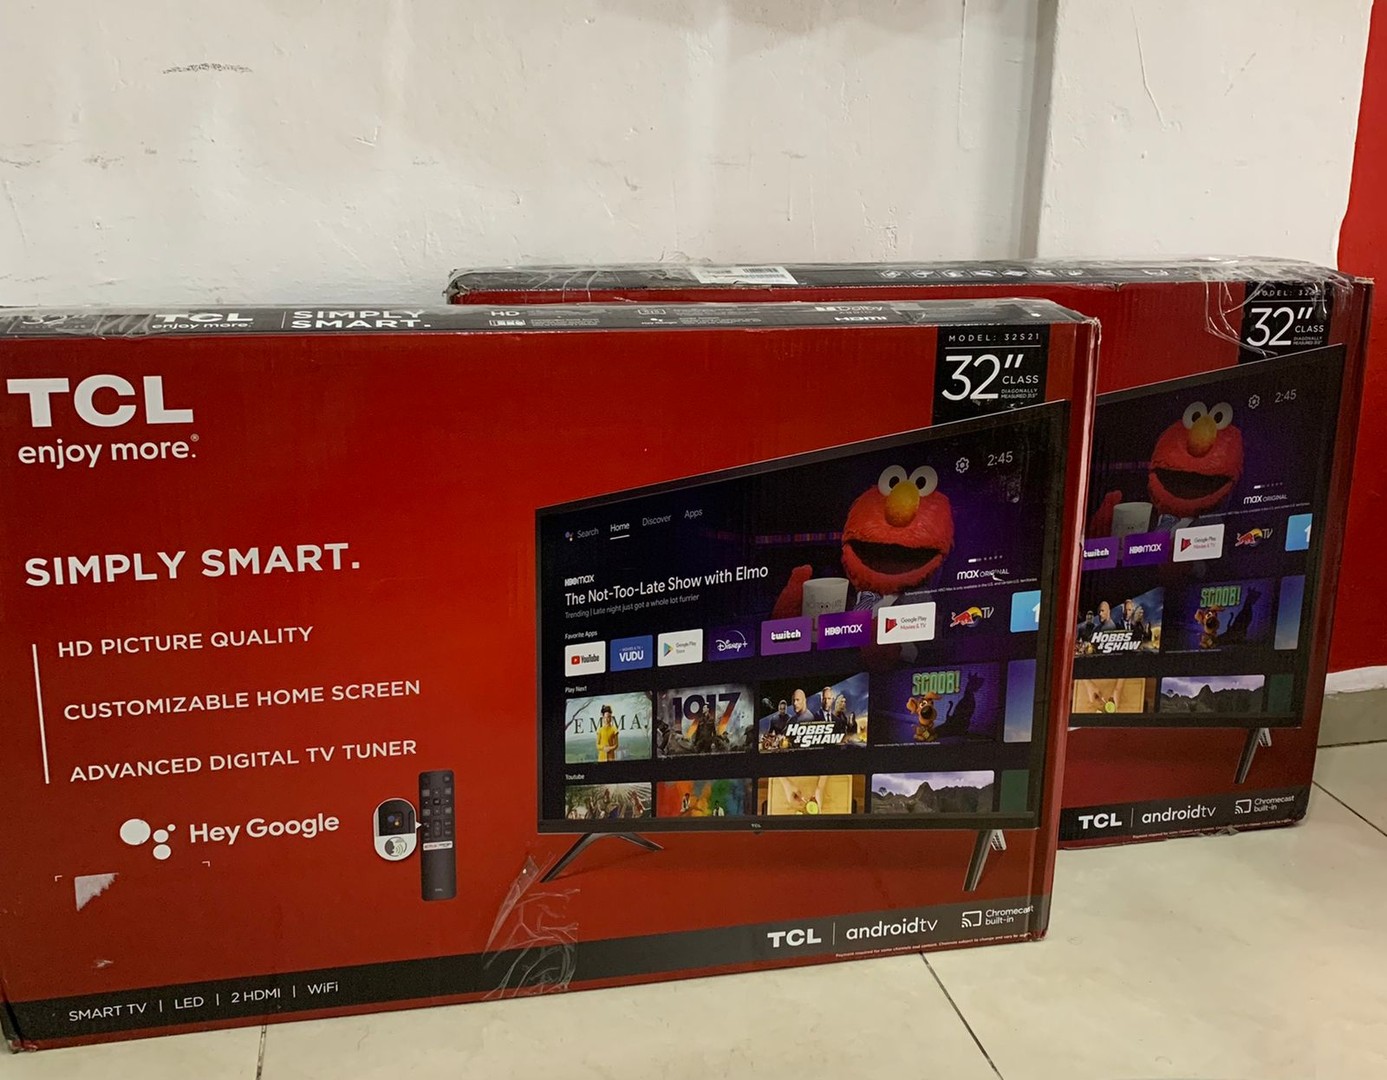 Televisor TCL 32” Class 3 LED Full HD Smart TV Android